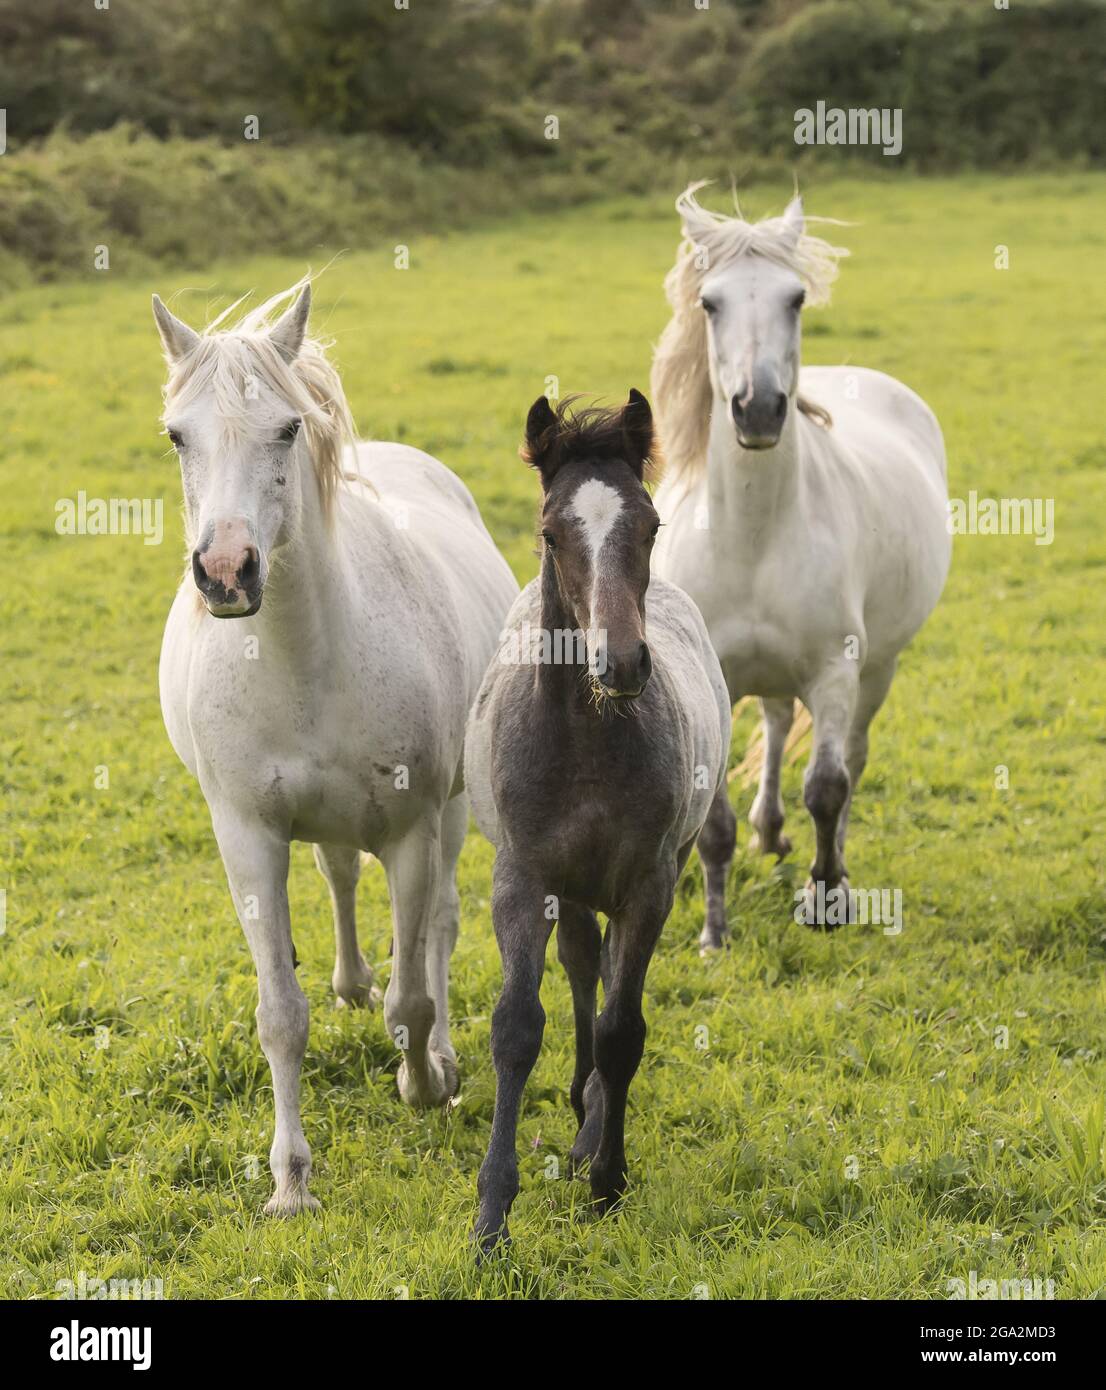 Portrait of horses (Equus ferus caballus) galloping in a grassy field; Menlo, County Galway, Ireland Stock Photo